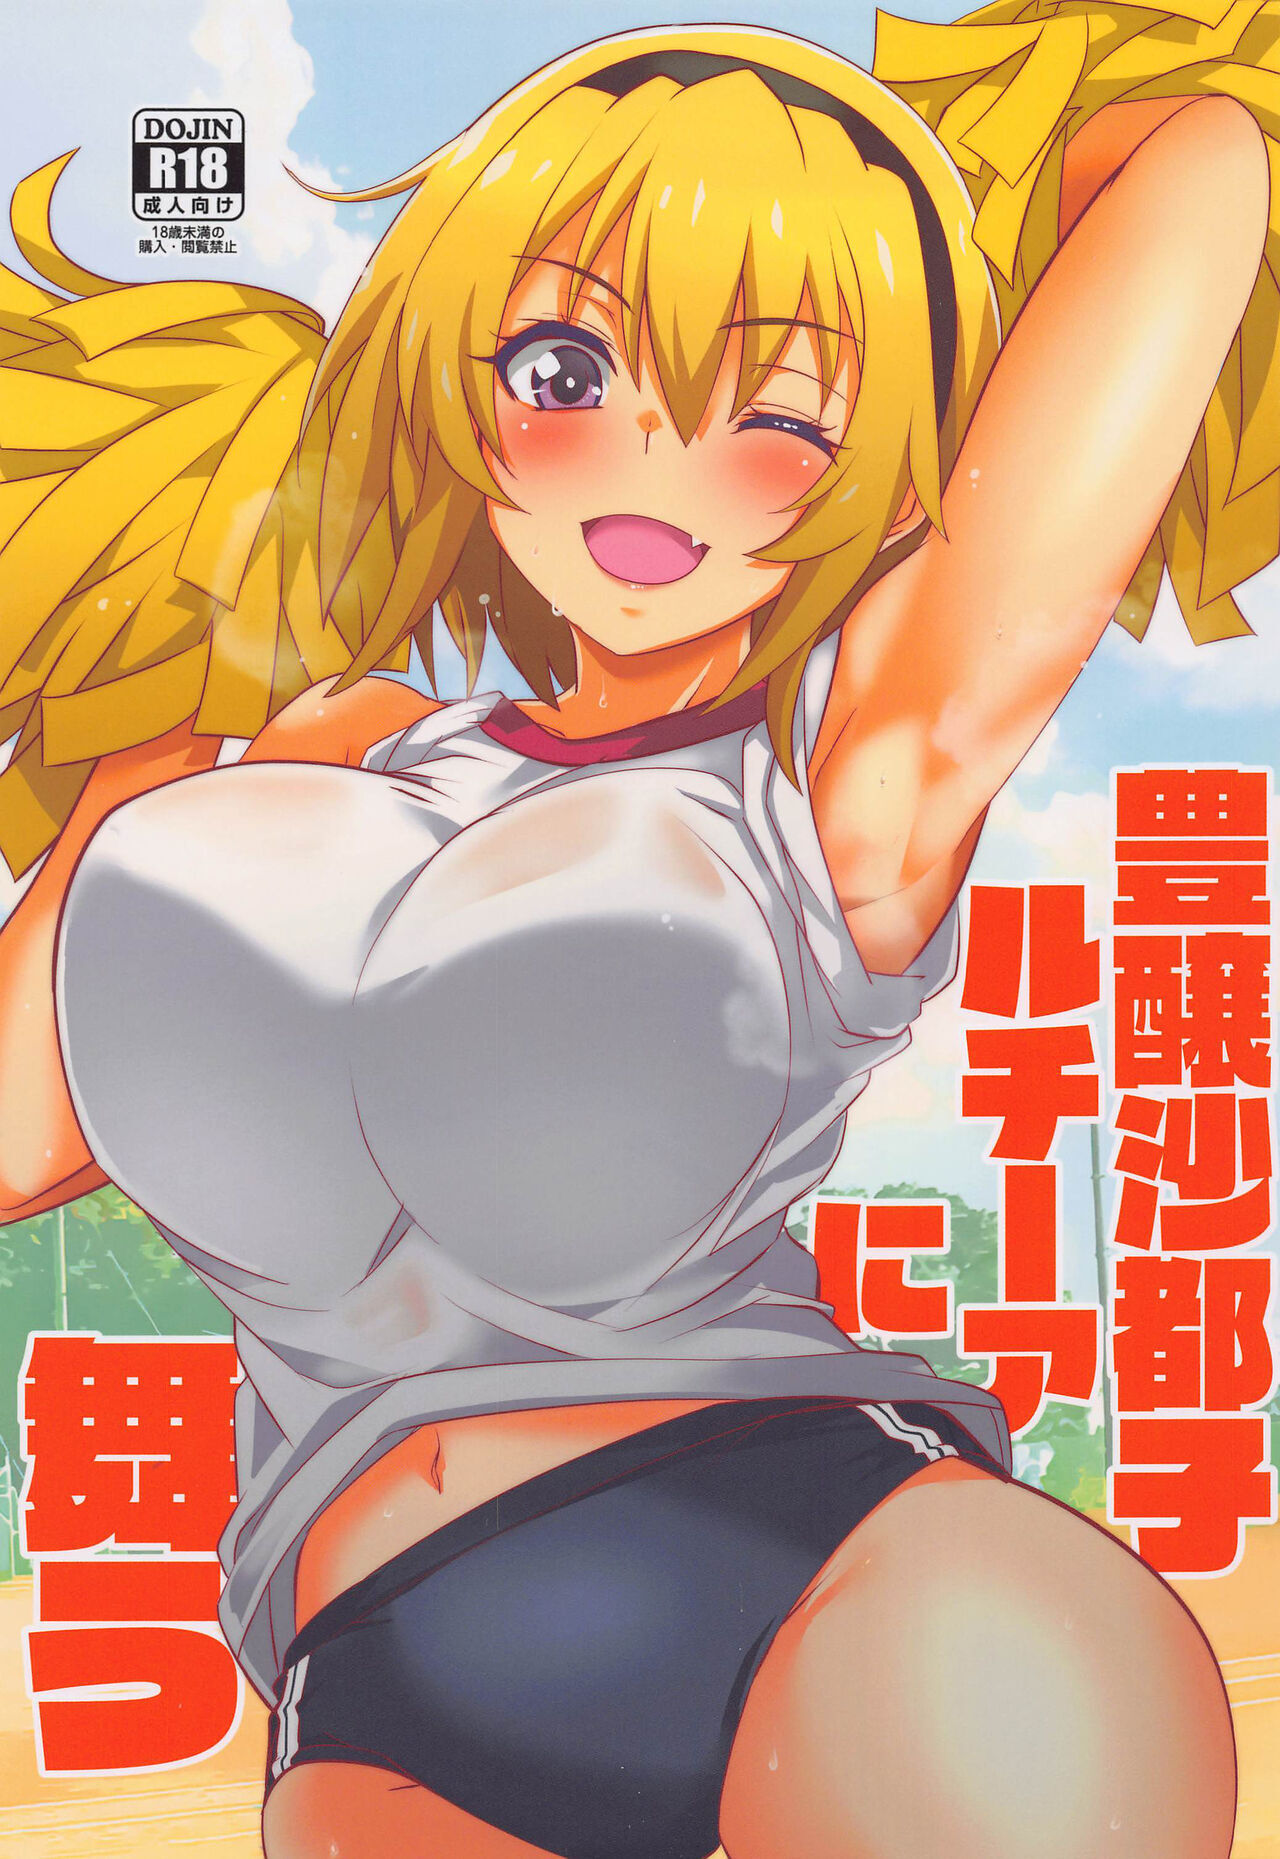 satoko houjou - sorted by number of objects - Free Hentai